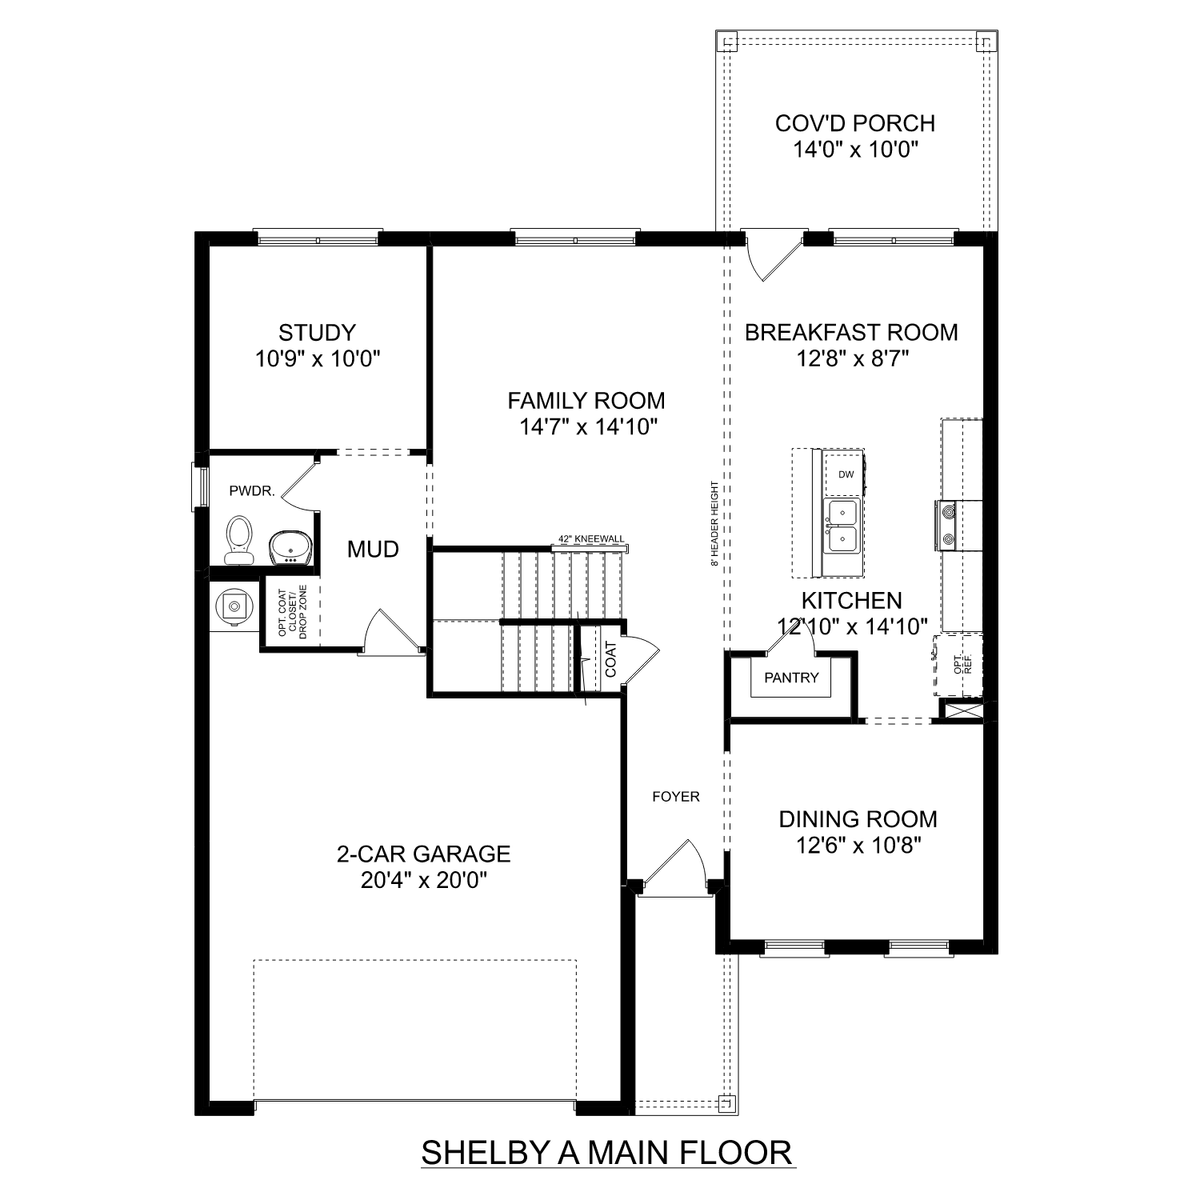 1 - The Shelby A buildable floor plan layout in Davidson Homes' Flint Meadows community.